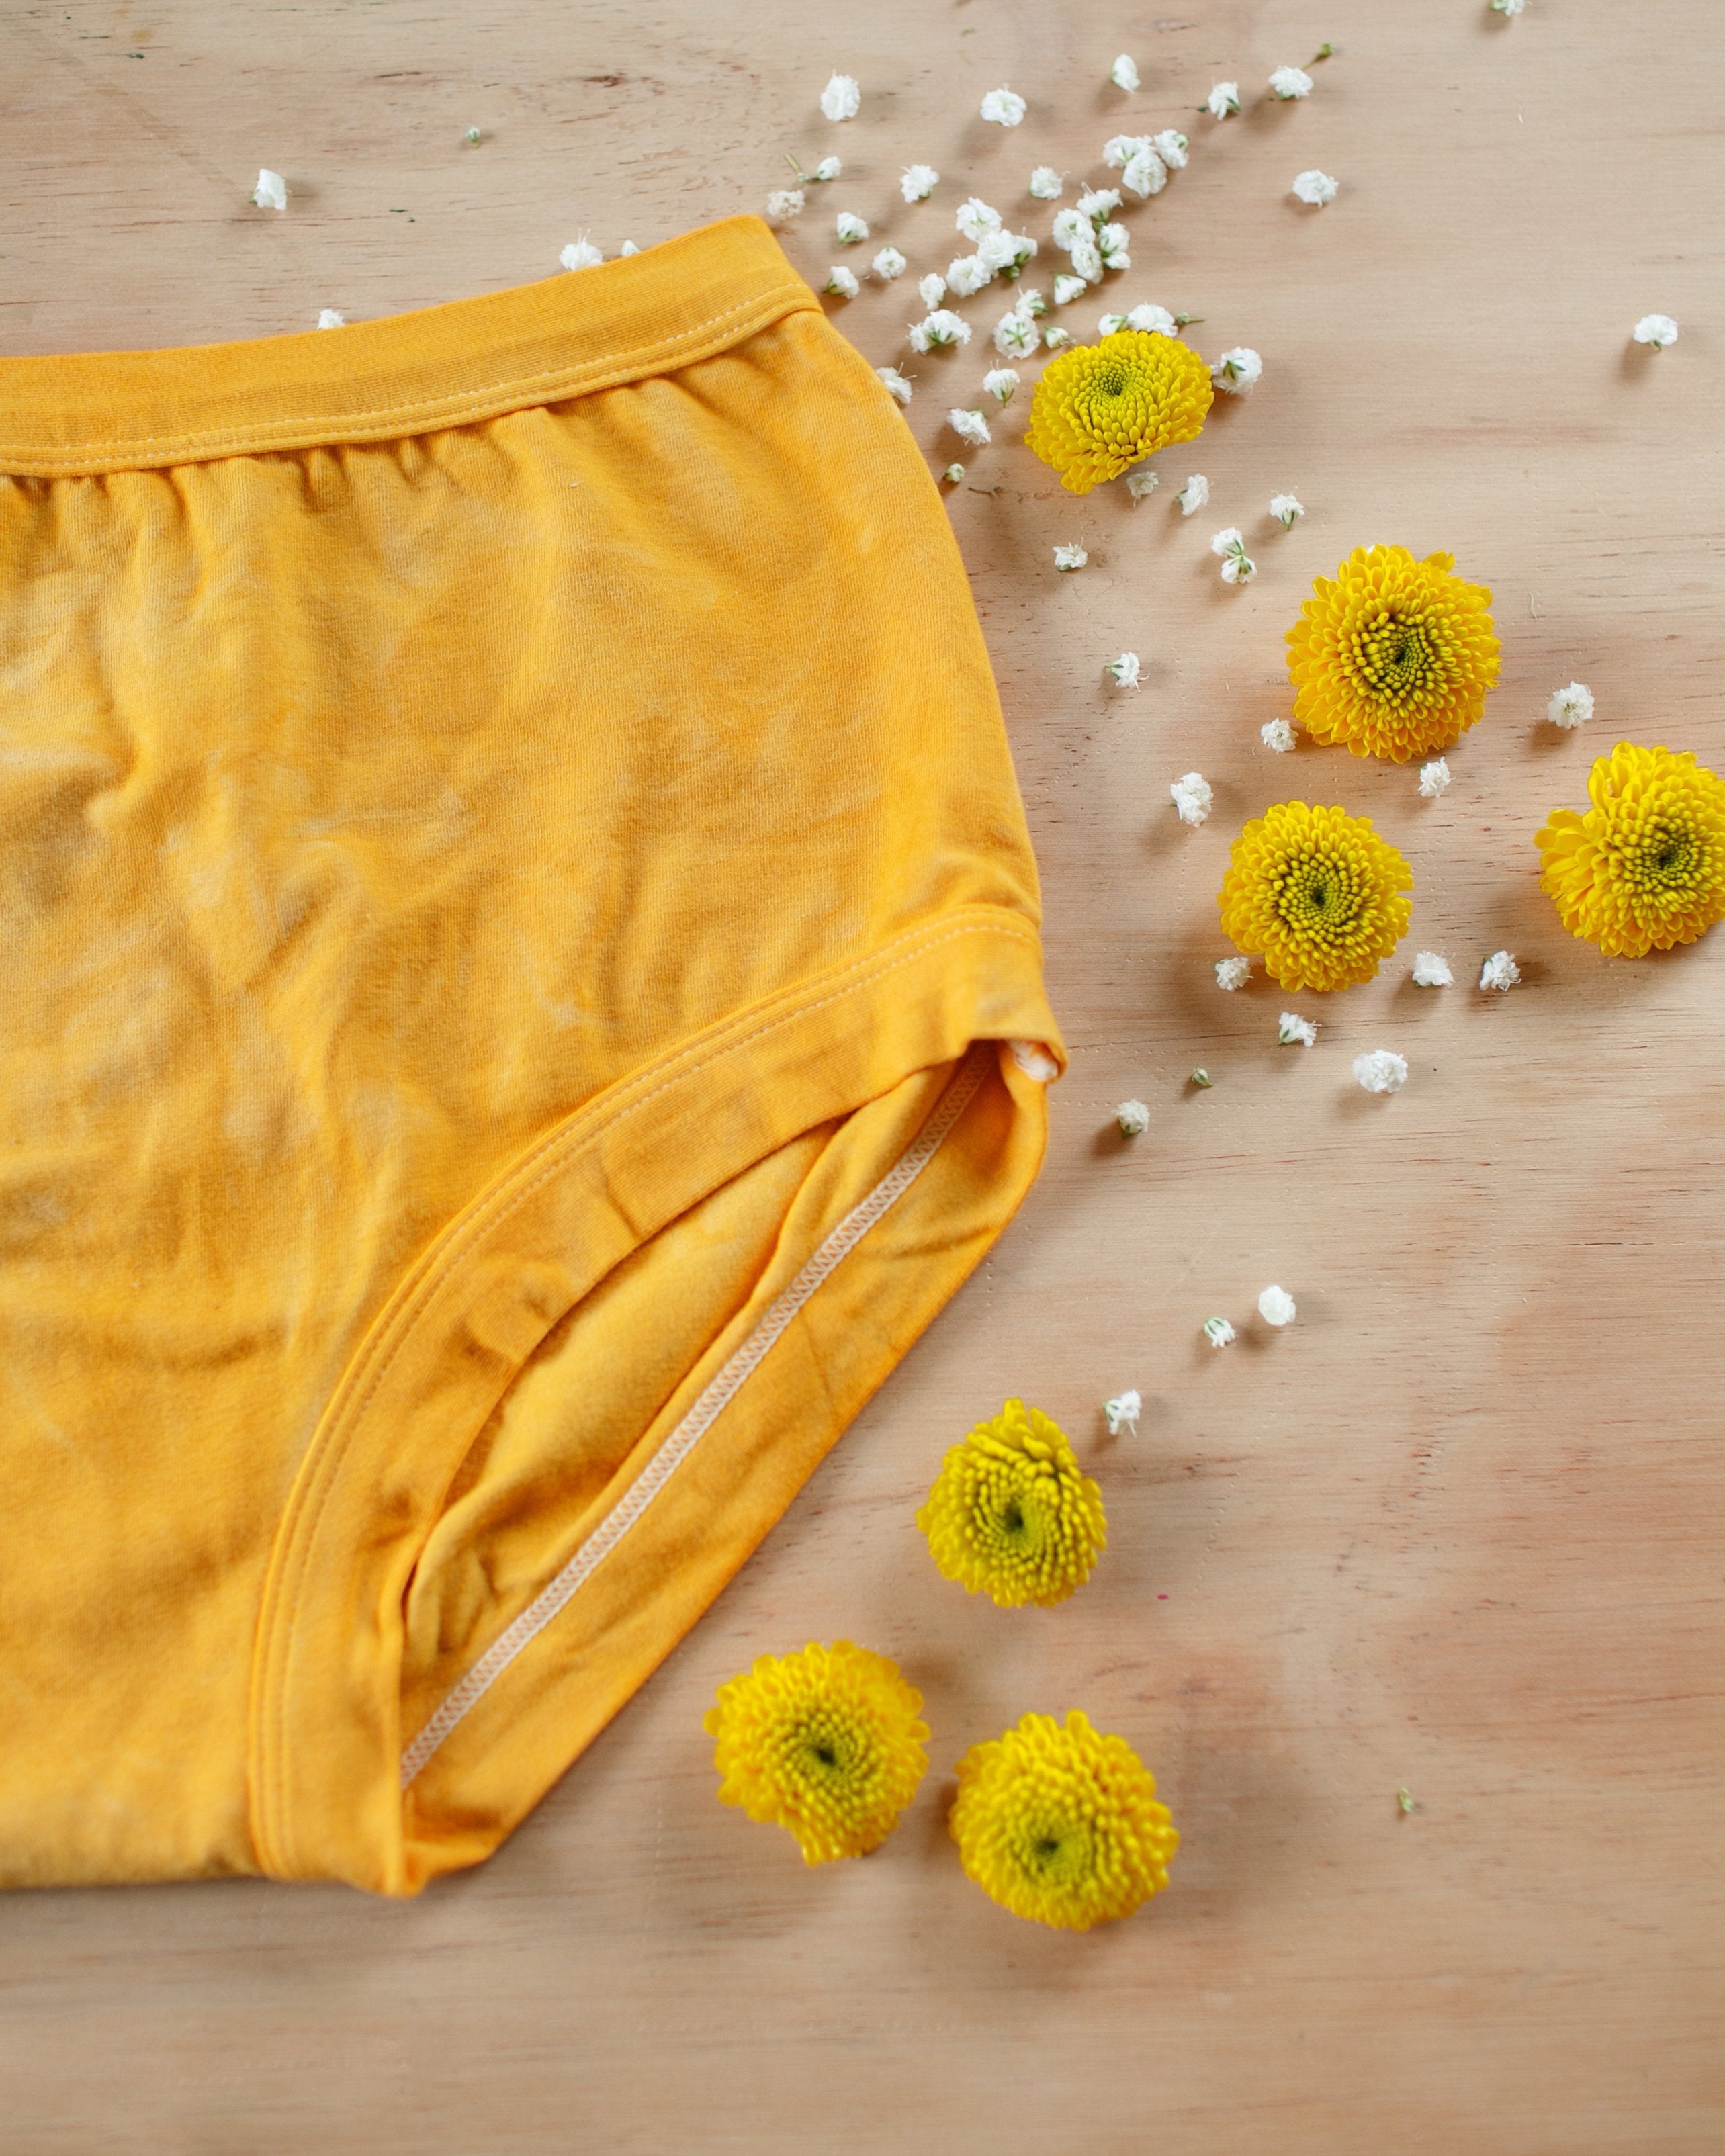 Flat-lay of Thunderpants organic cotton Original style underwear in limited edition hand dyed marigold color with marigolds and white flowers.